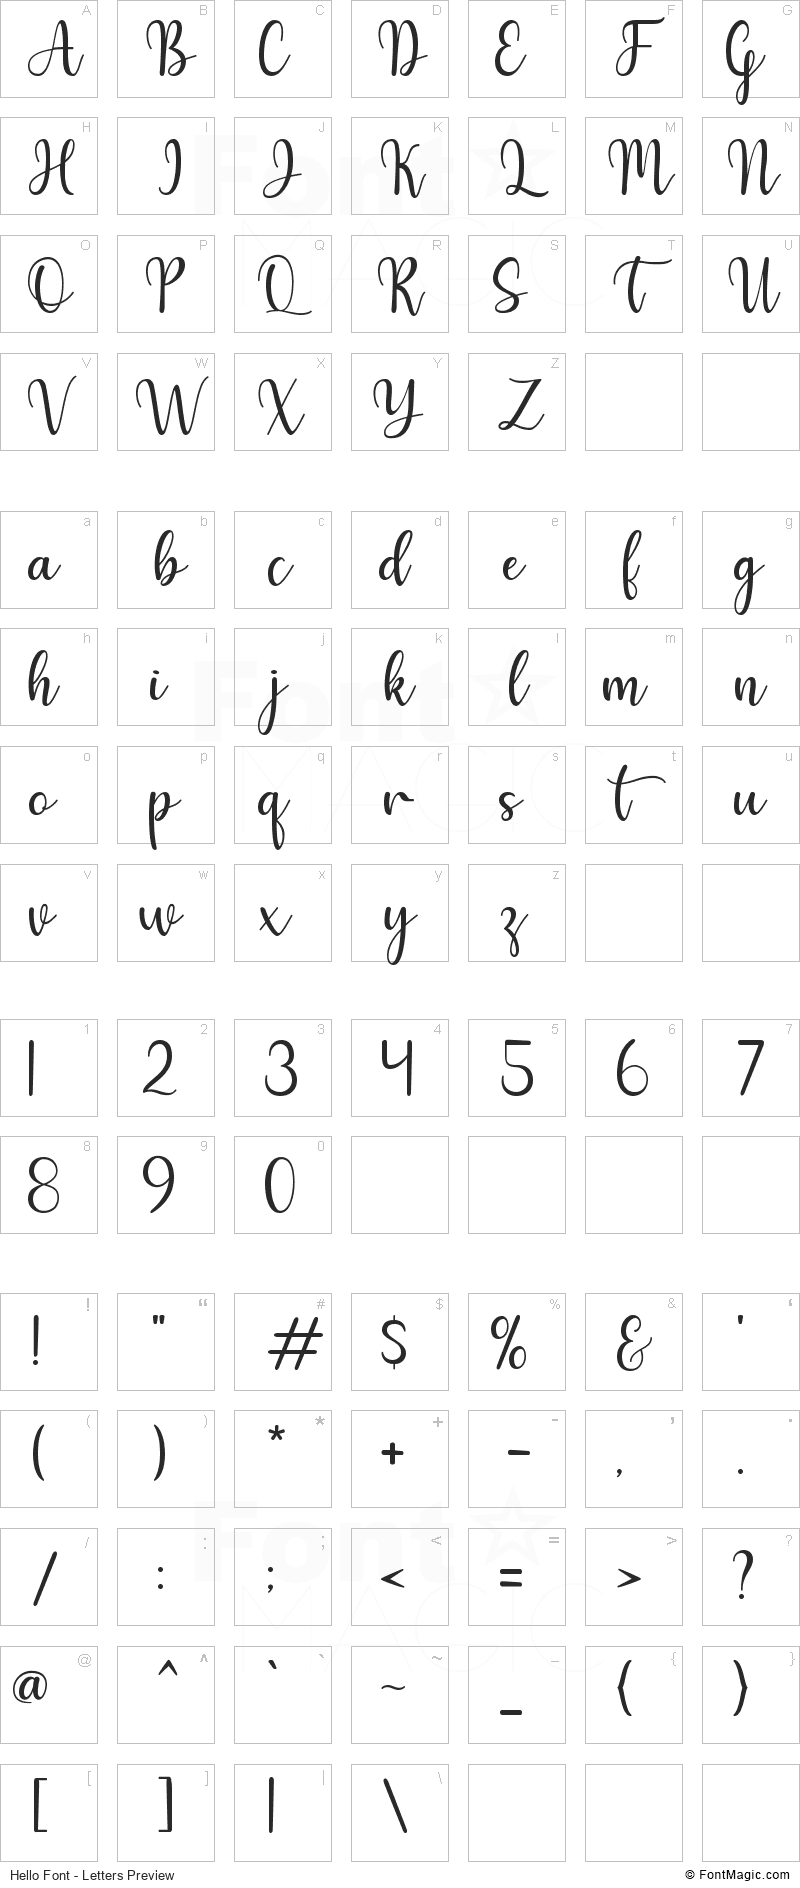 Hello Font - All Latters Preview Chart